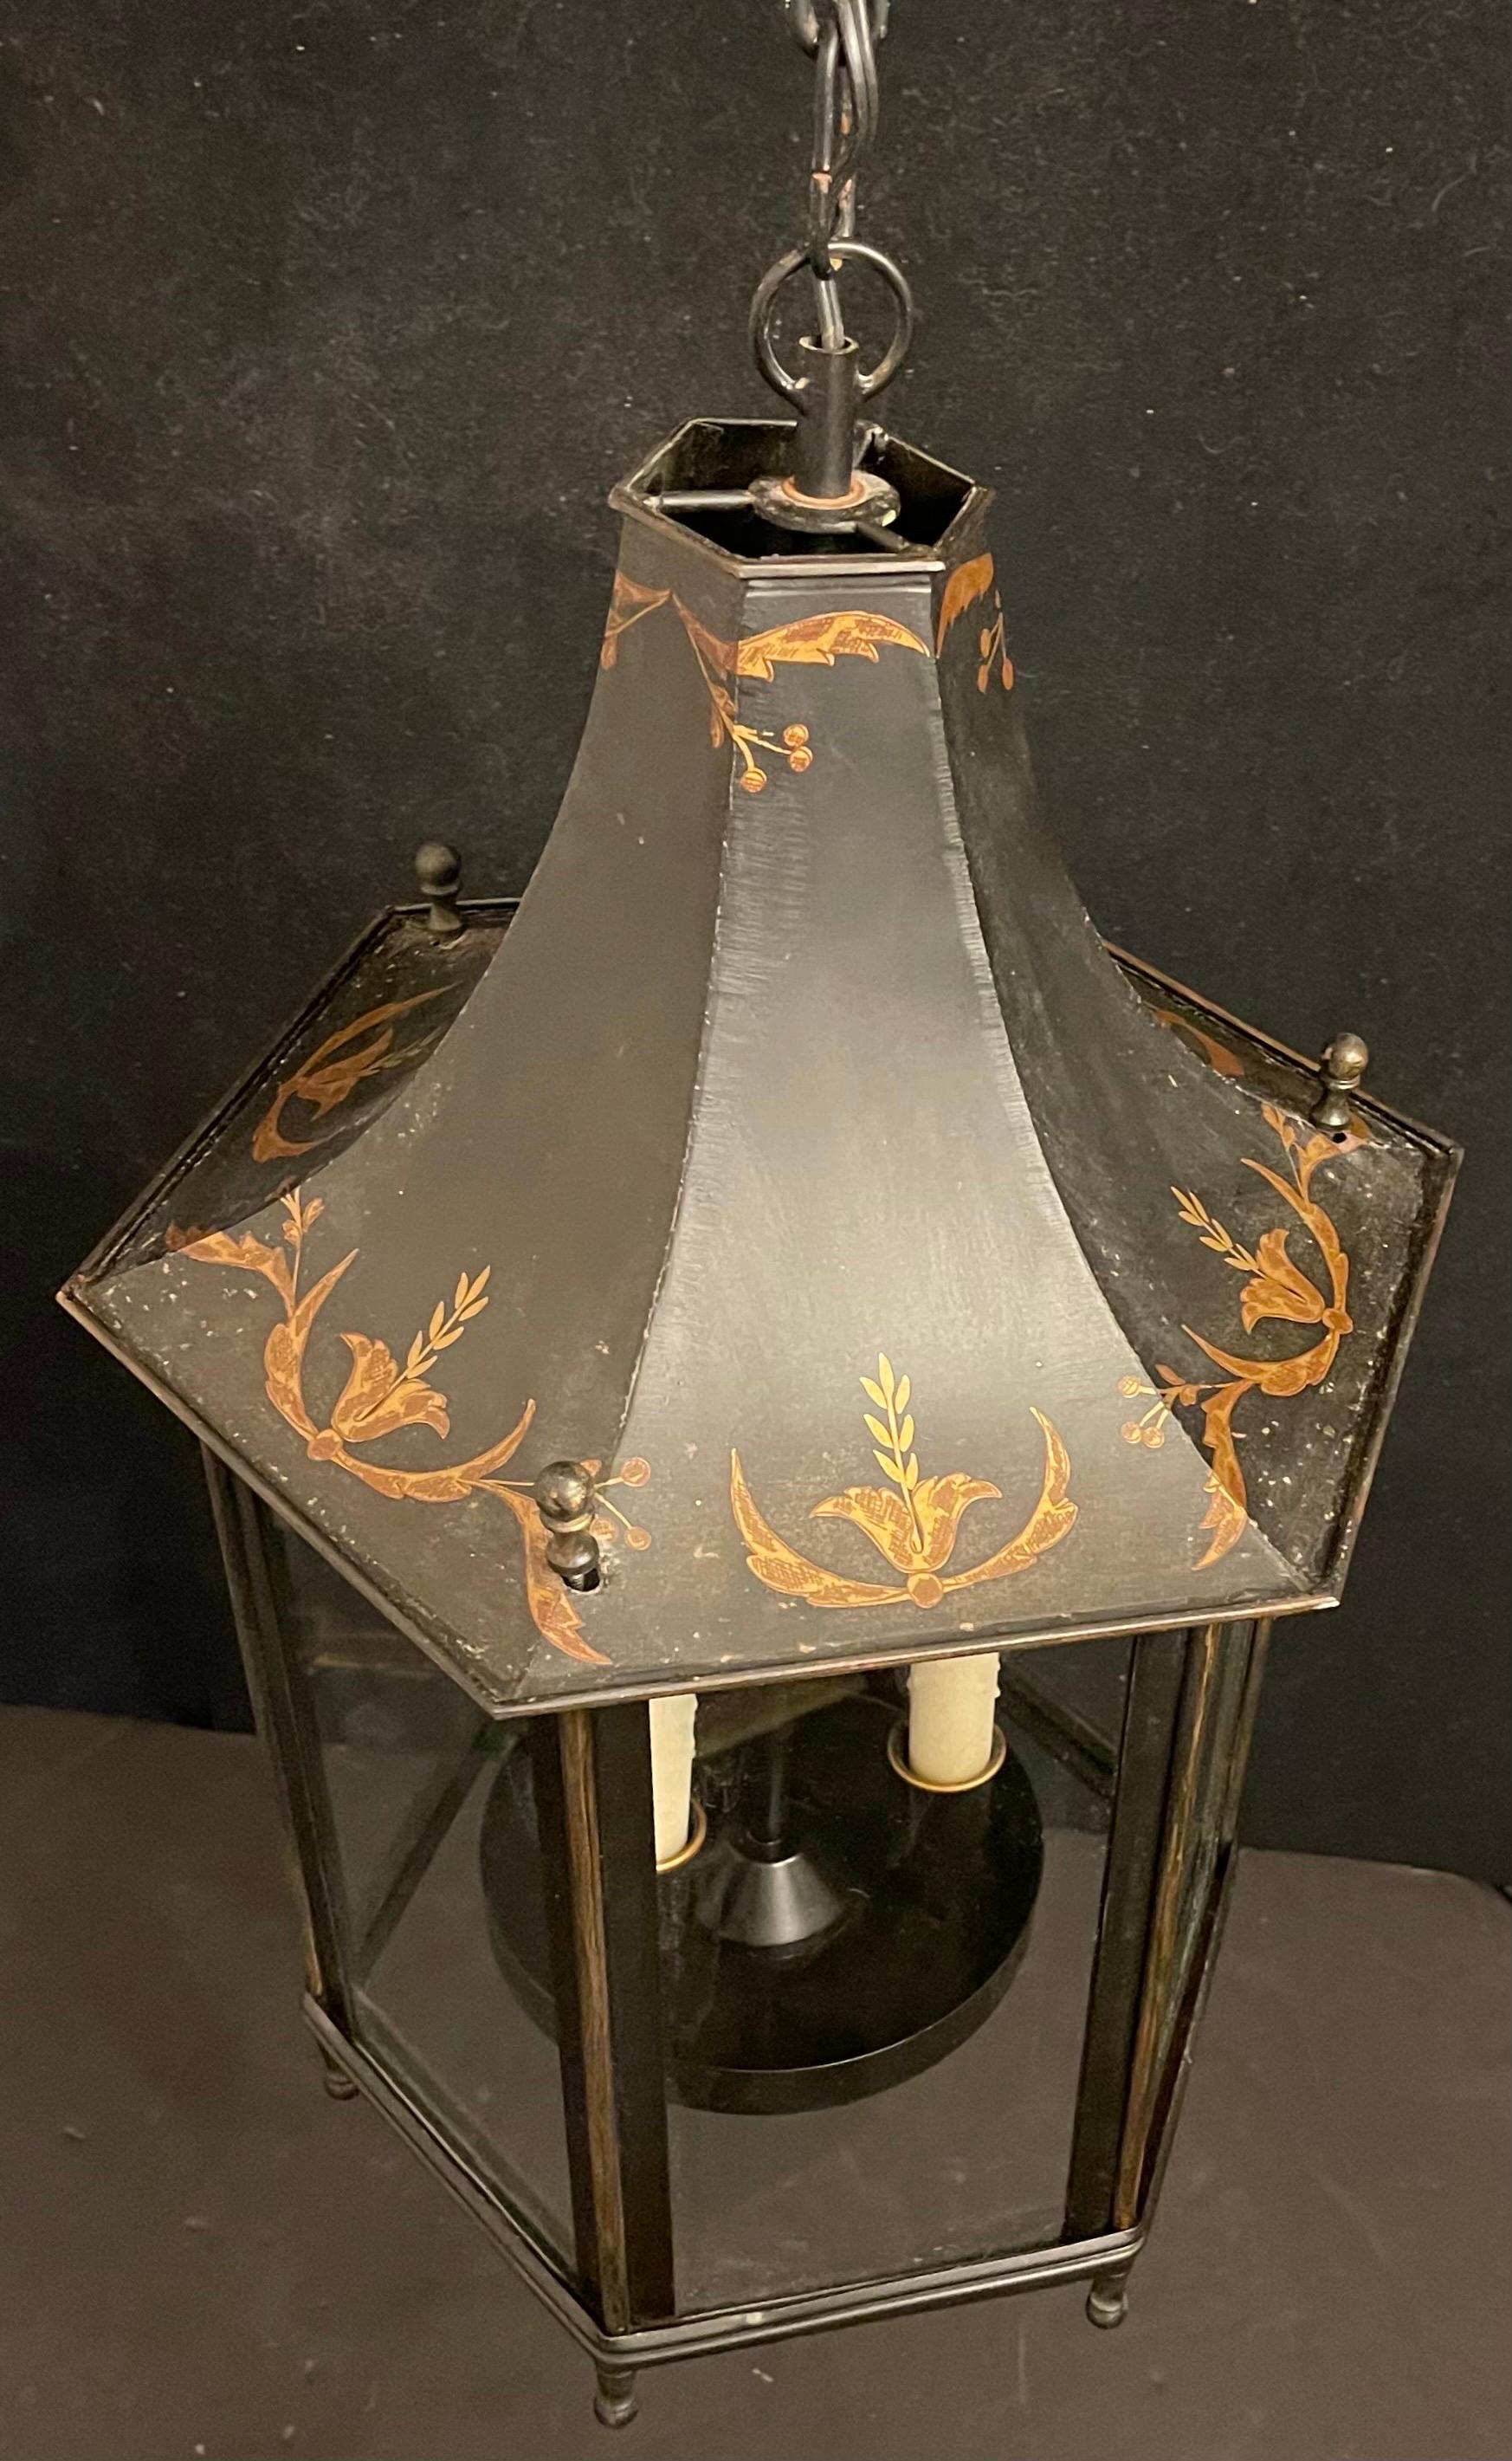 Belle Époque Wonderful Hand Painted Tole Pagoda Octagonal Chinoiserie Lantern Pendent Fixture For Sale